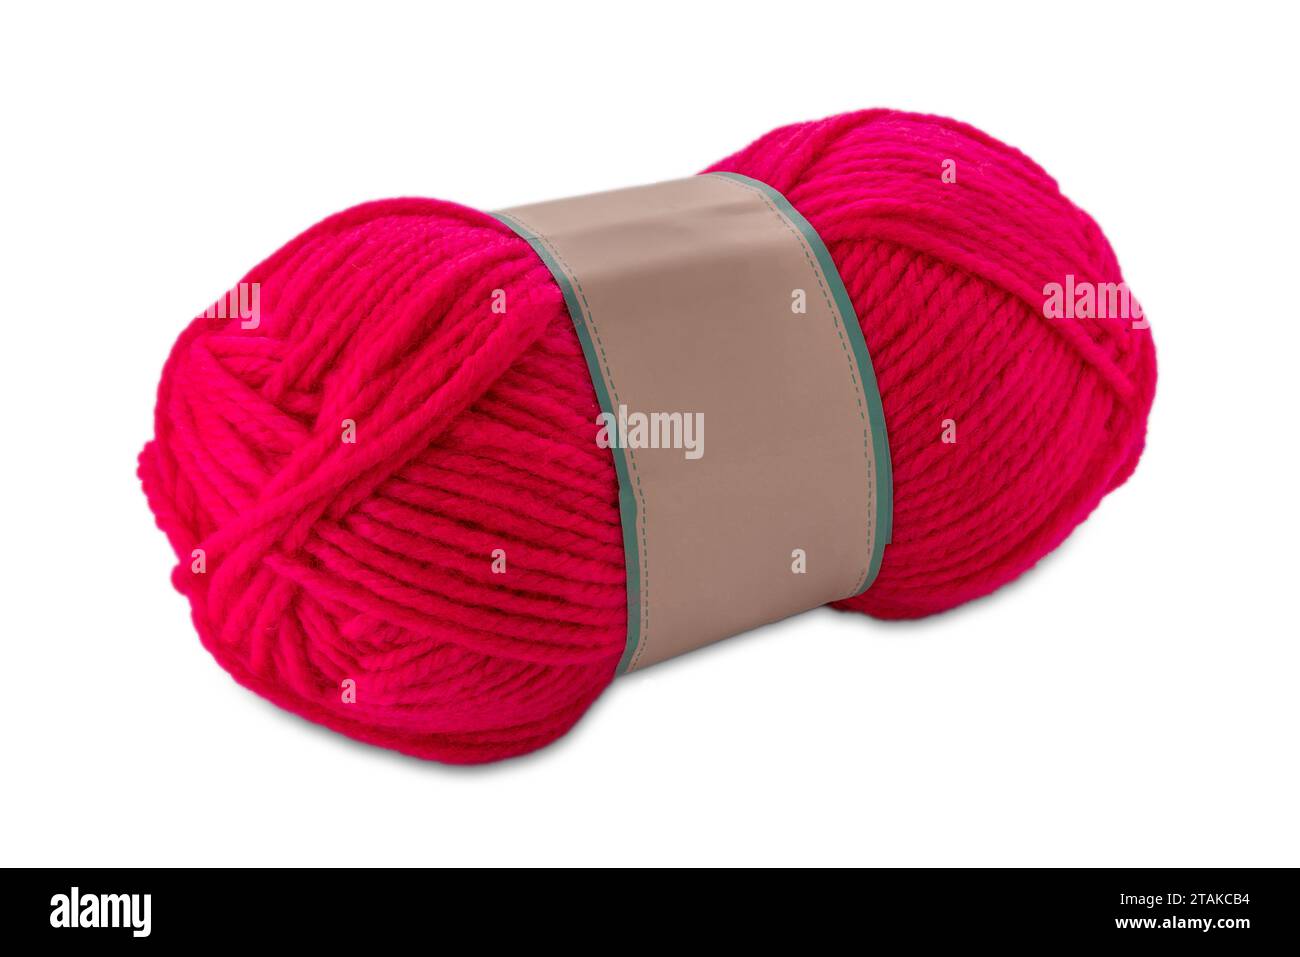 Ball of fuchsia-colored wool yarn closed with paper band isolated on white with clipping path included Stock Photo